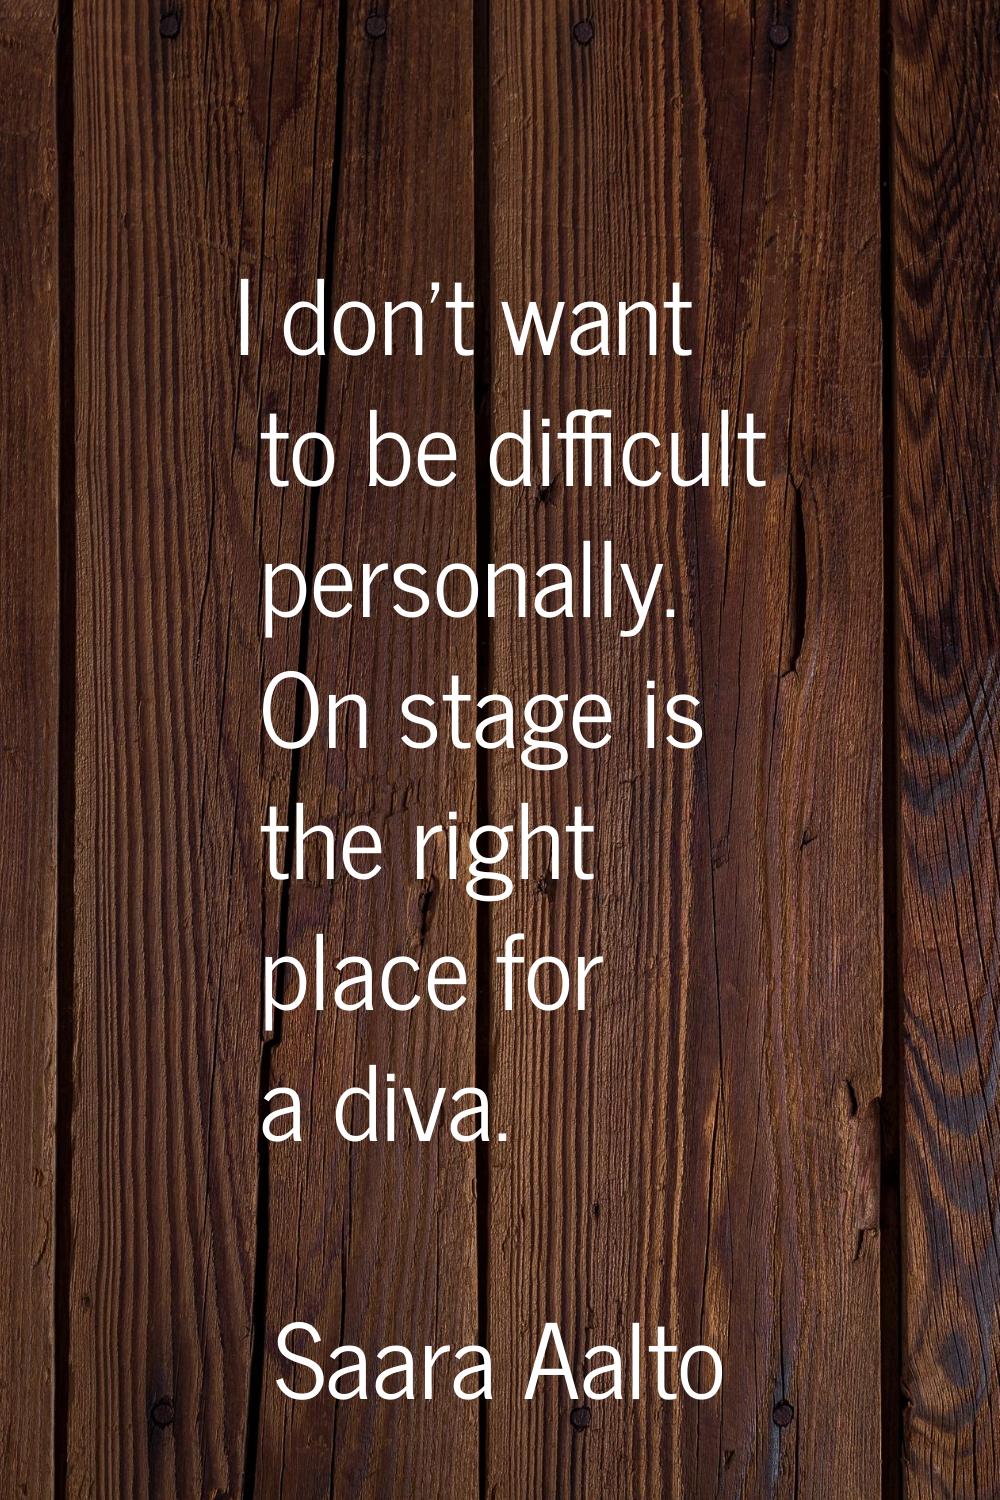 I don't want to be difficult personally. On stage is the right place for a diva.